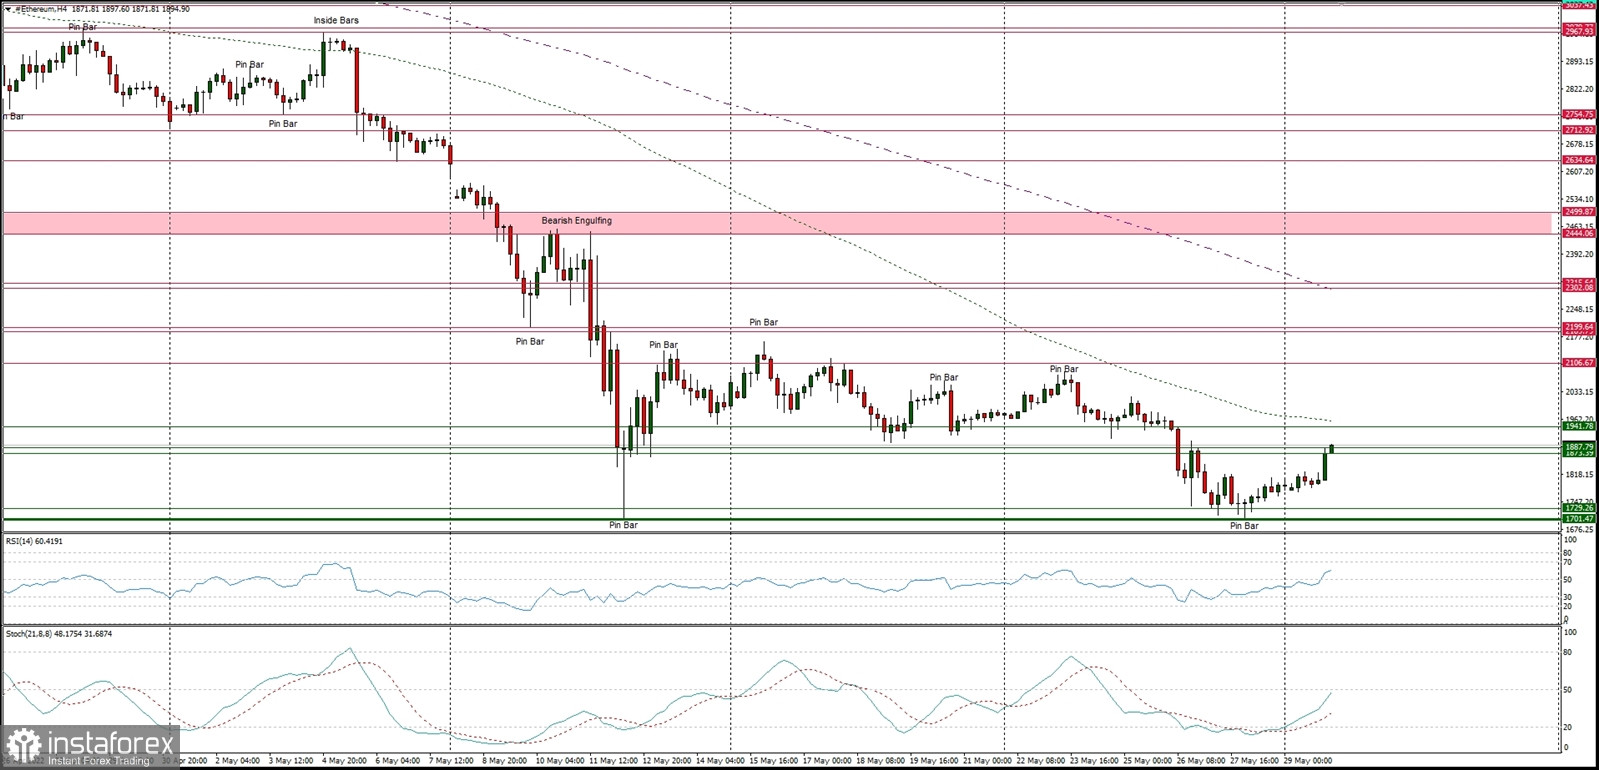 Technical Analysis of ETH/USD for May 30, 2022